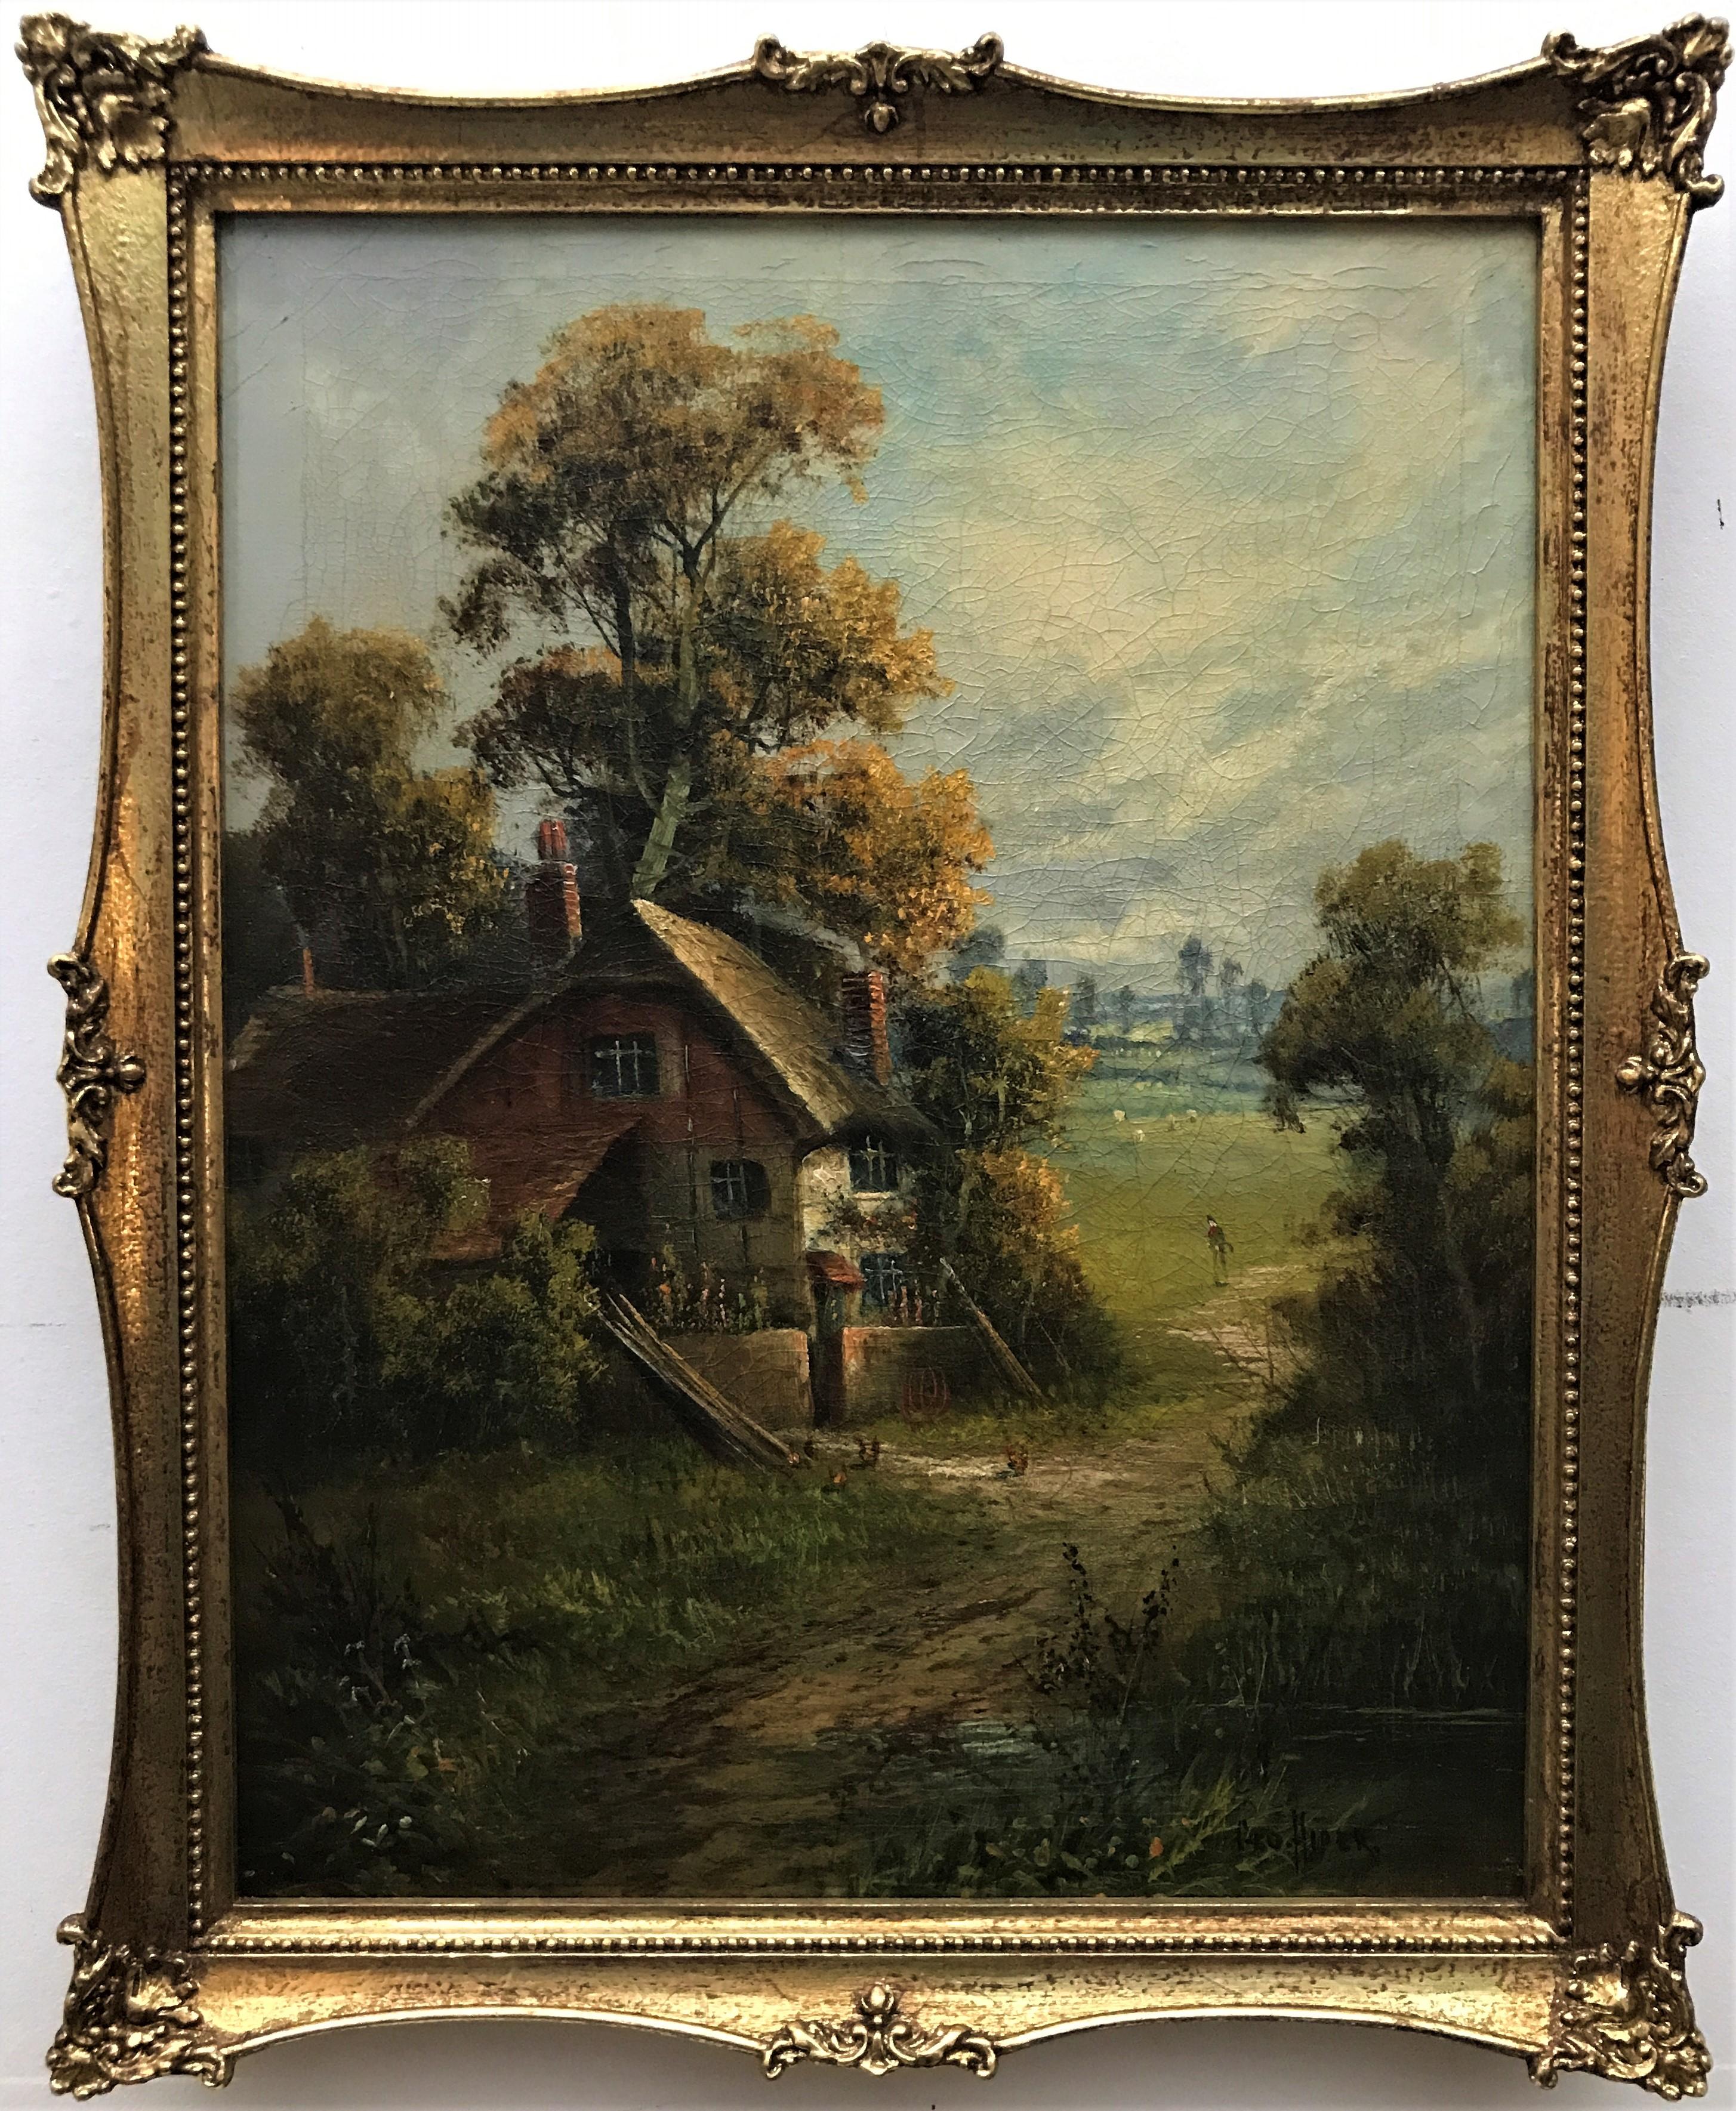 Landscape with Cottage, original oil on canvas, realist style, 20thCentury - Painting by George Hider